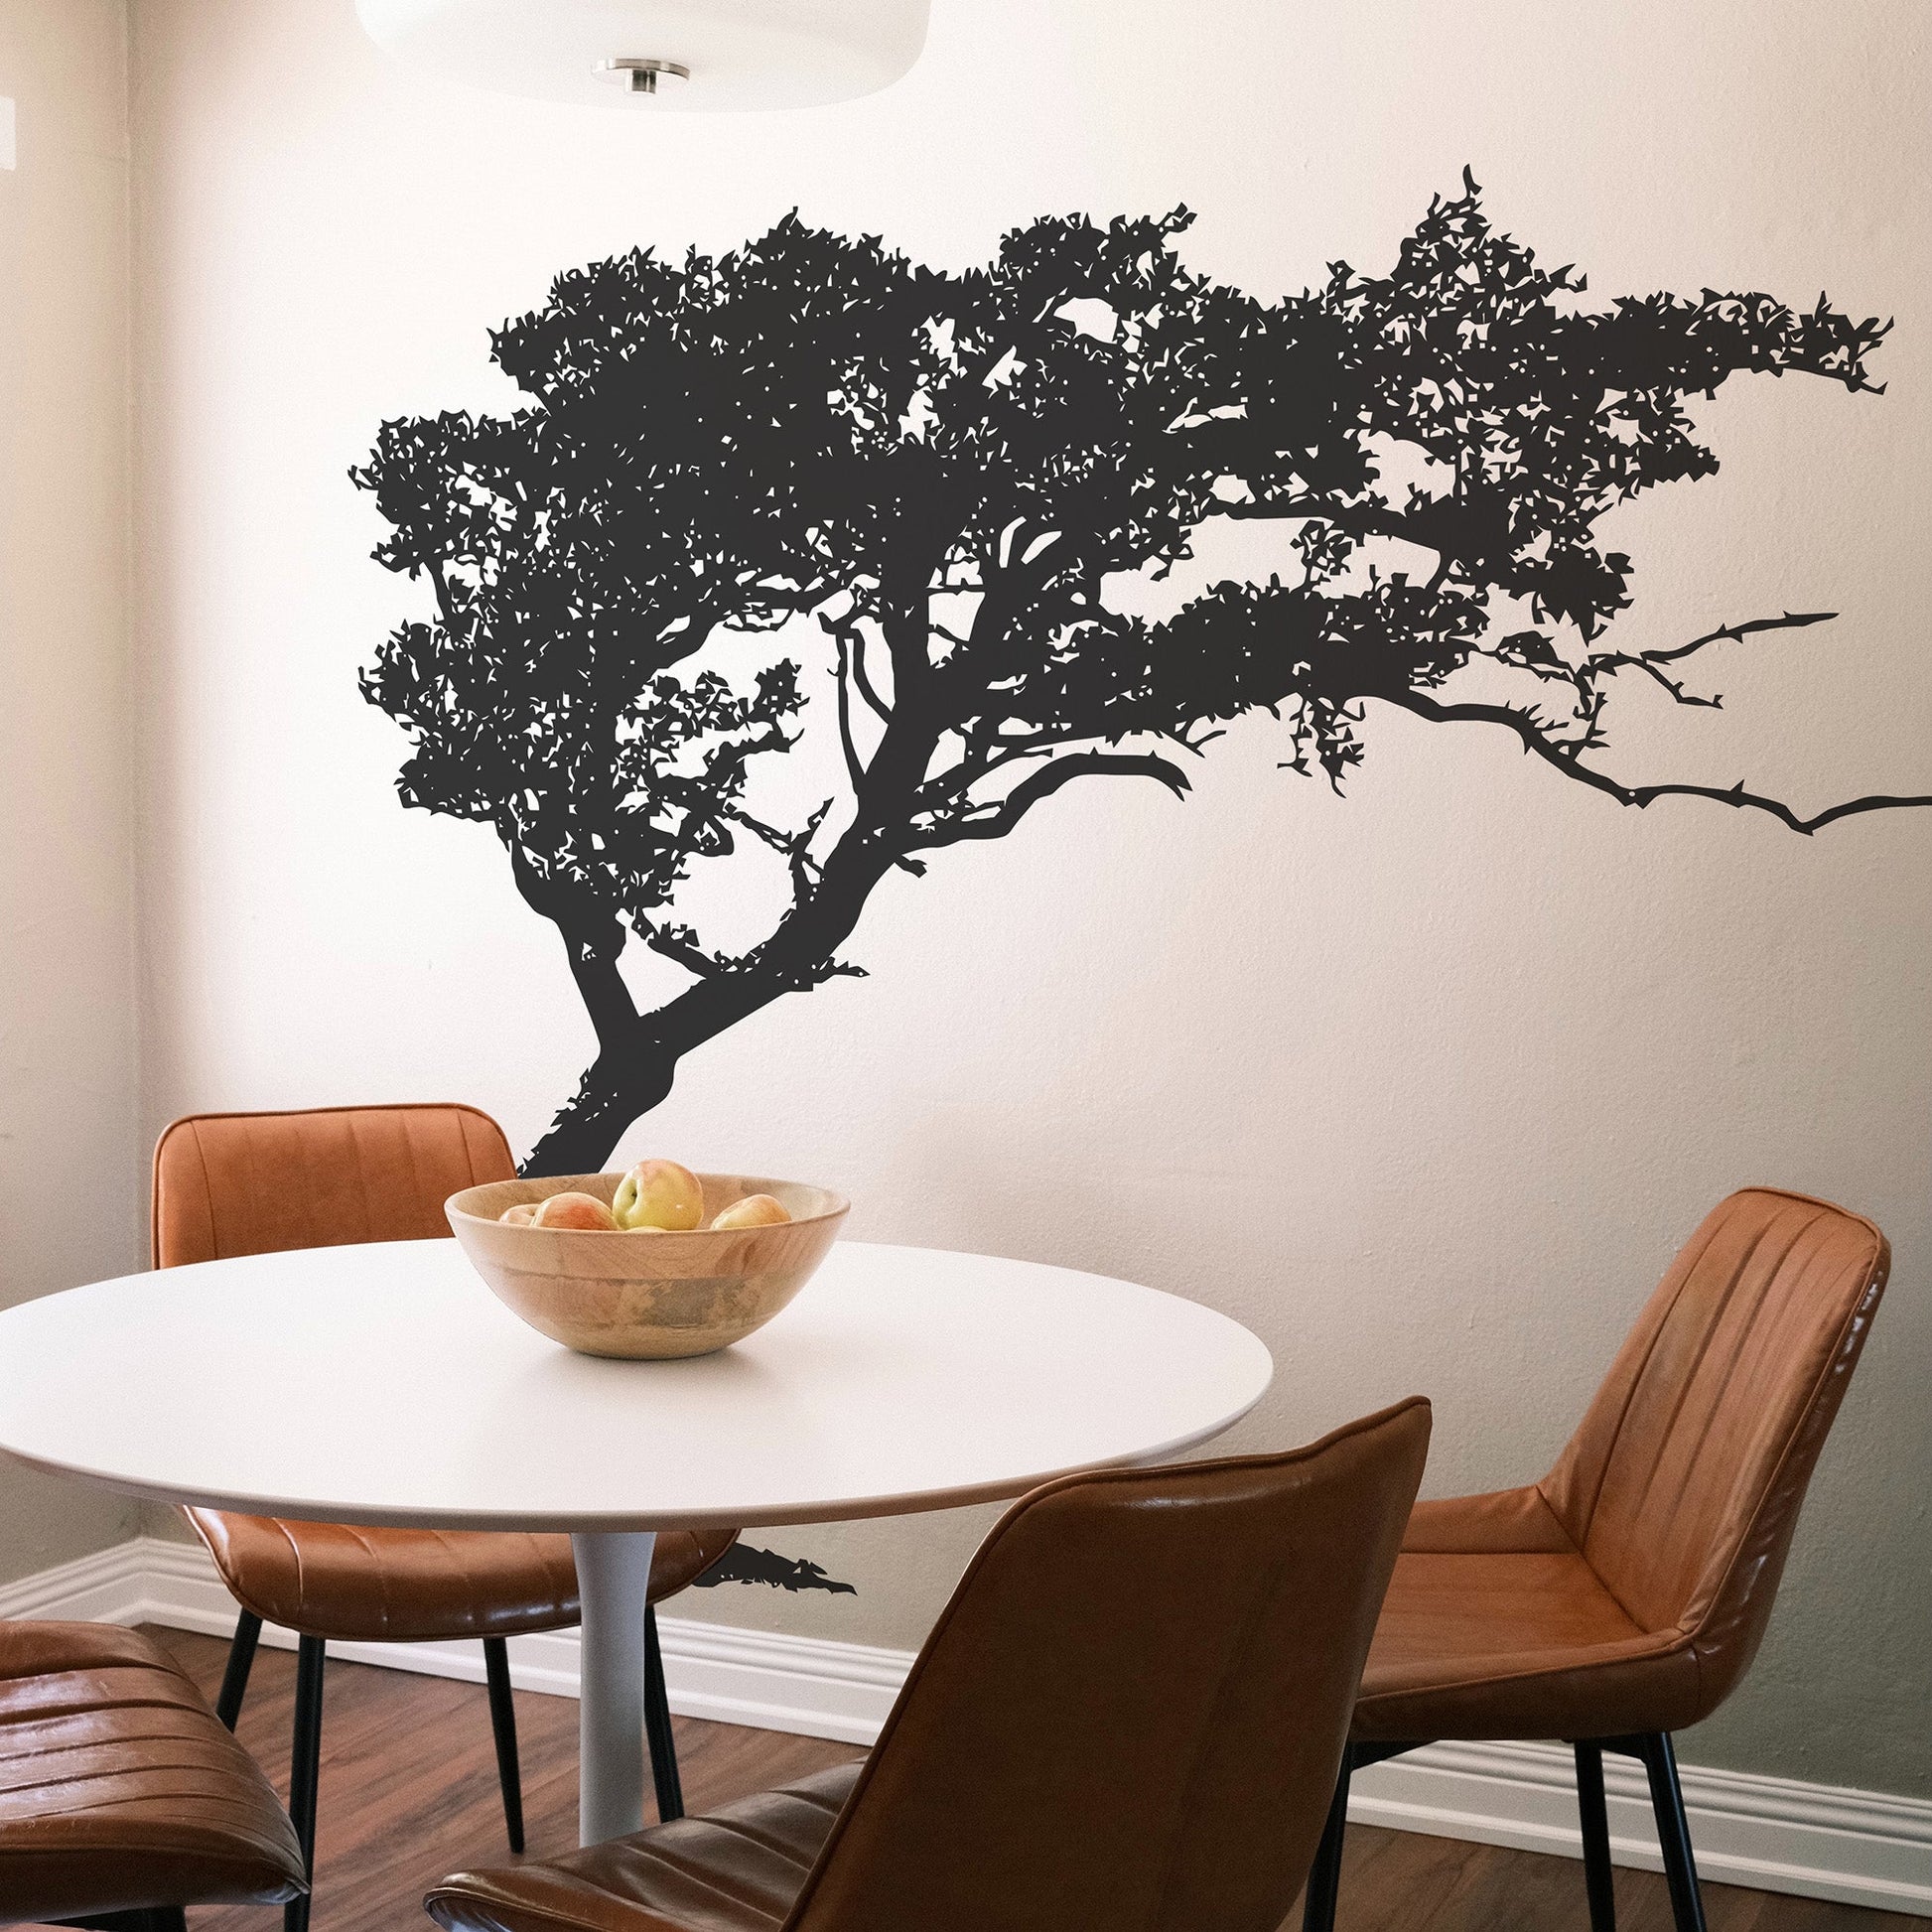 Black tree decal on a white wall in a dining room.